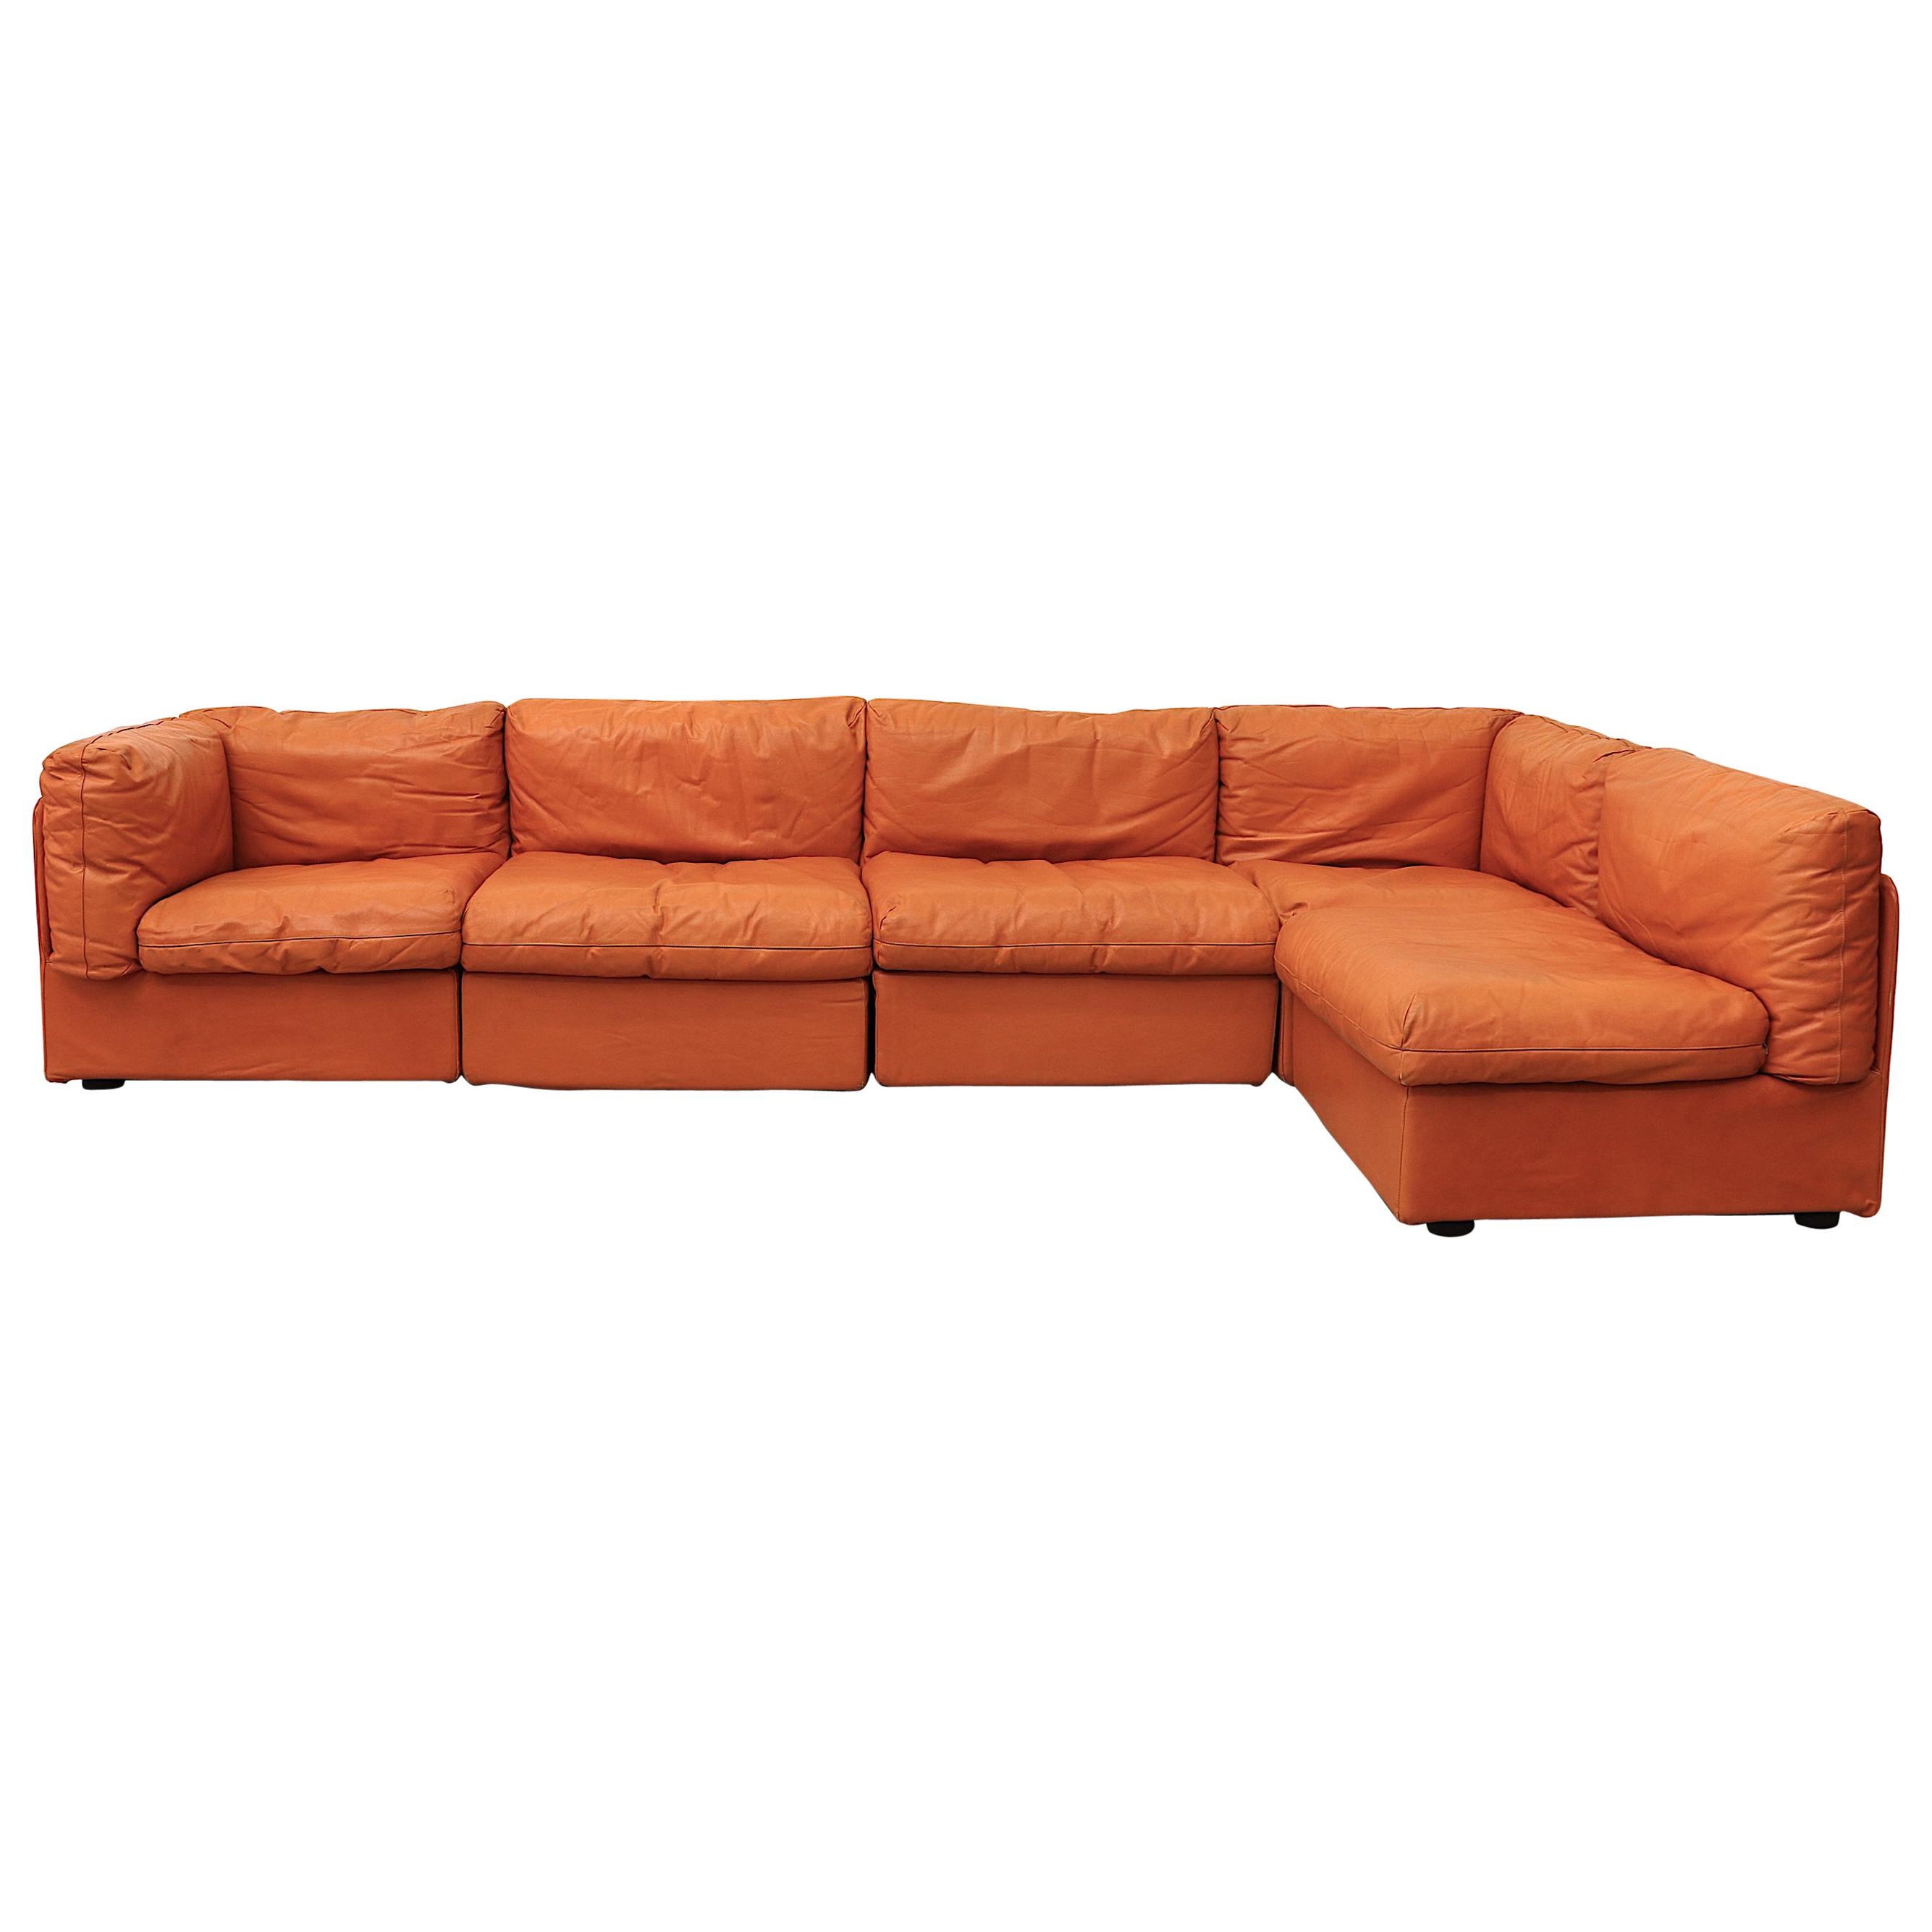 sectionals leather Sectional sofa at sale, Leather leather orange Sofa 1stDibs Italian orange Orange | sectional italian Bonacina orange sofa, sectional for